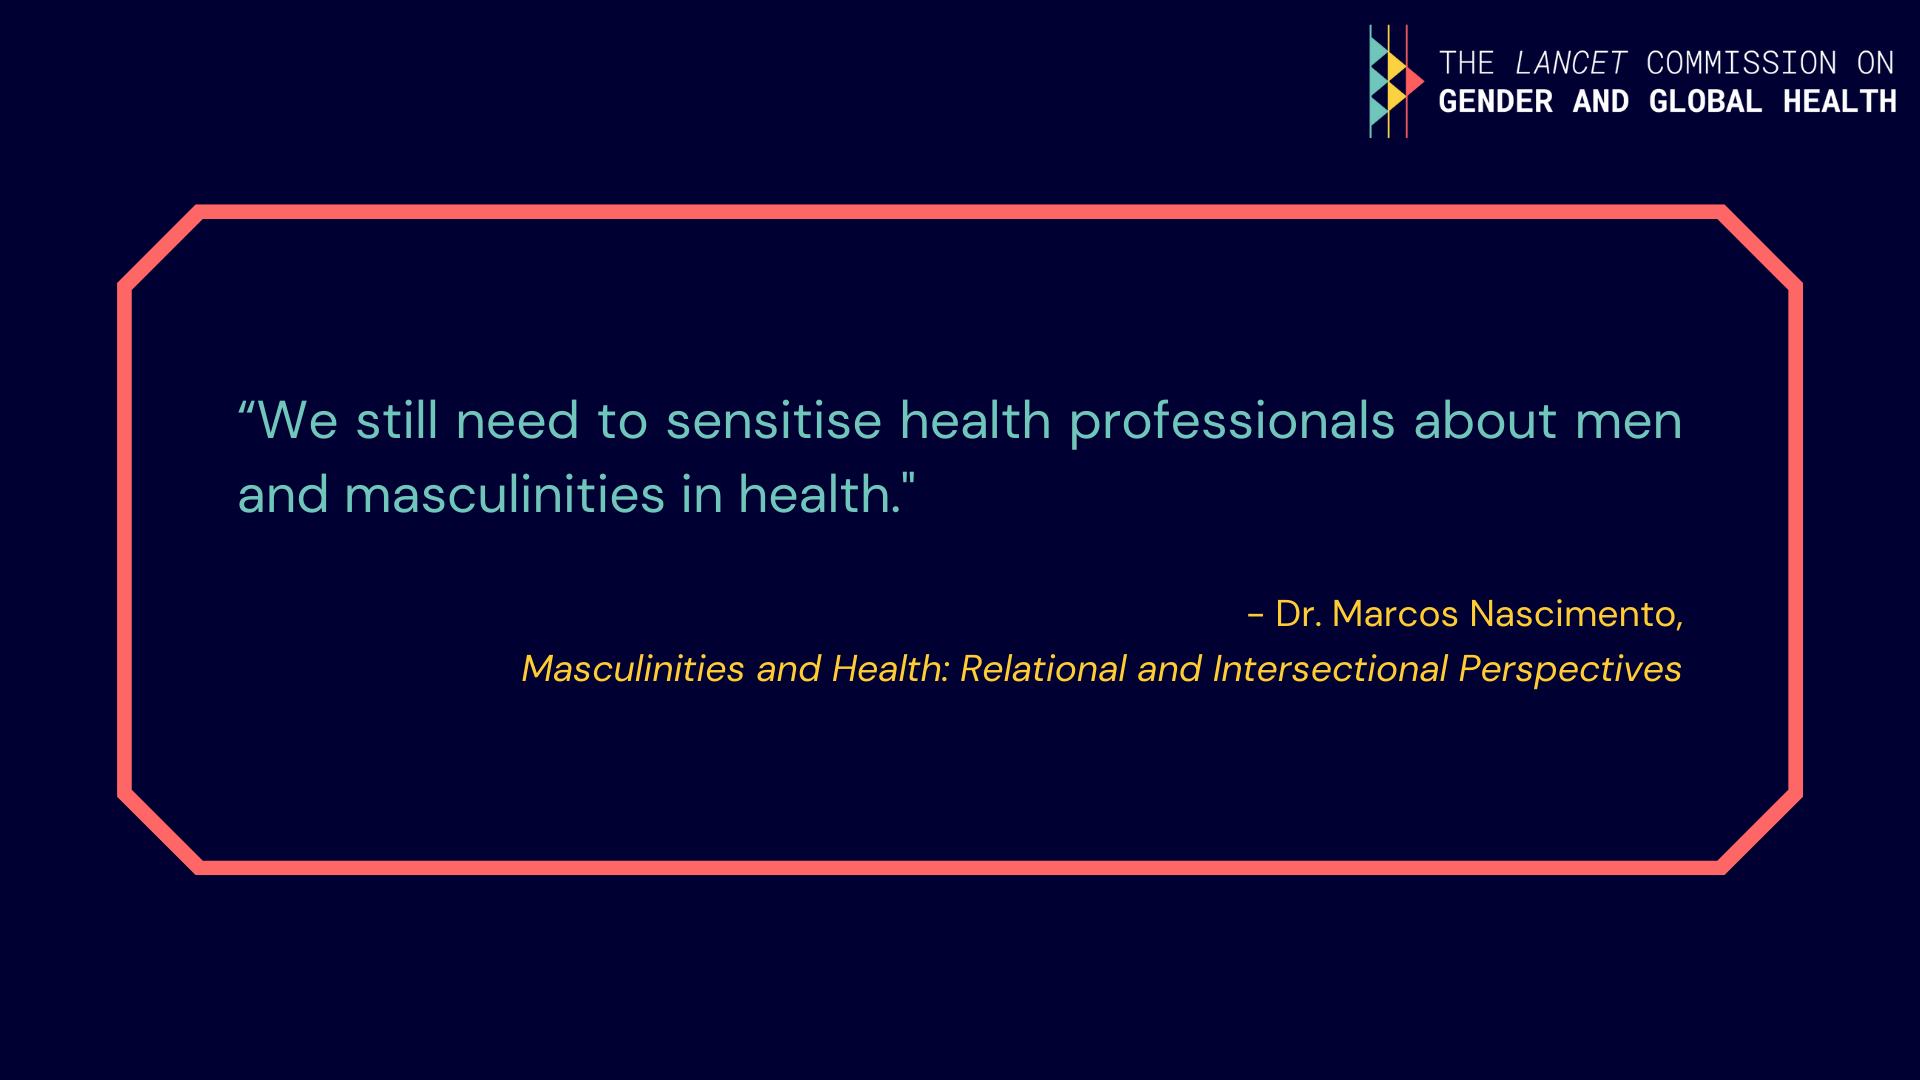 Marcos Nascimento: "We still need to sensitise health professionals about men and masculinities in health".